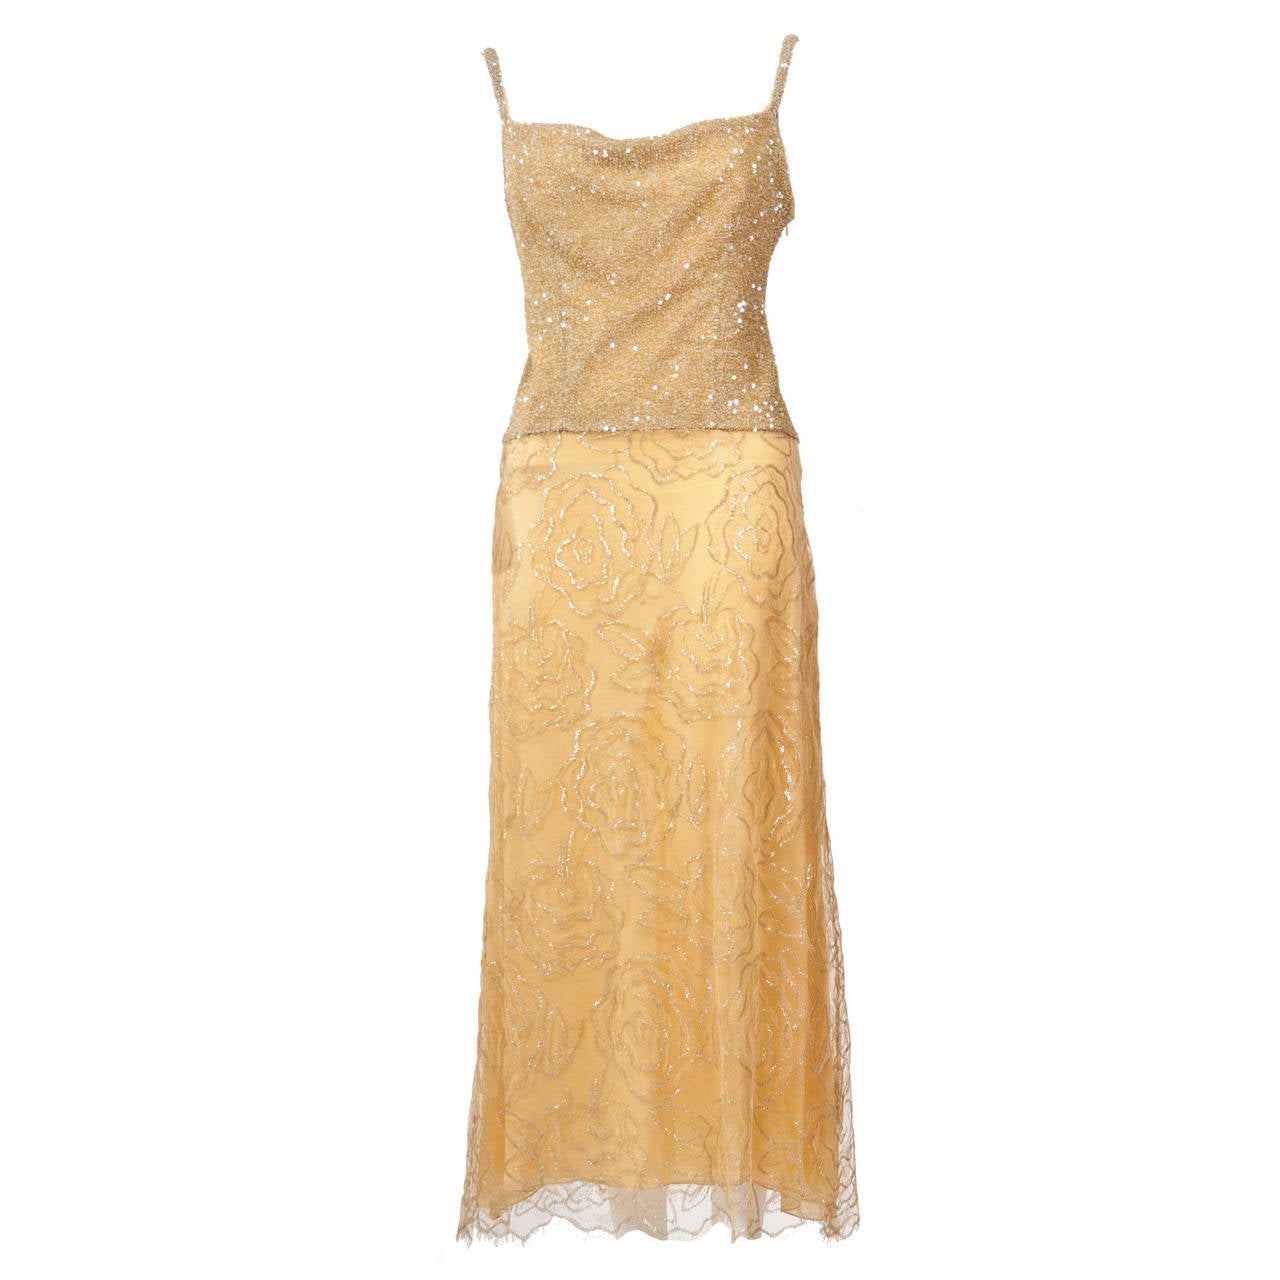 Celine By Michael Kors Beaded & Chantilly Lace Evening Dress For Sale